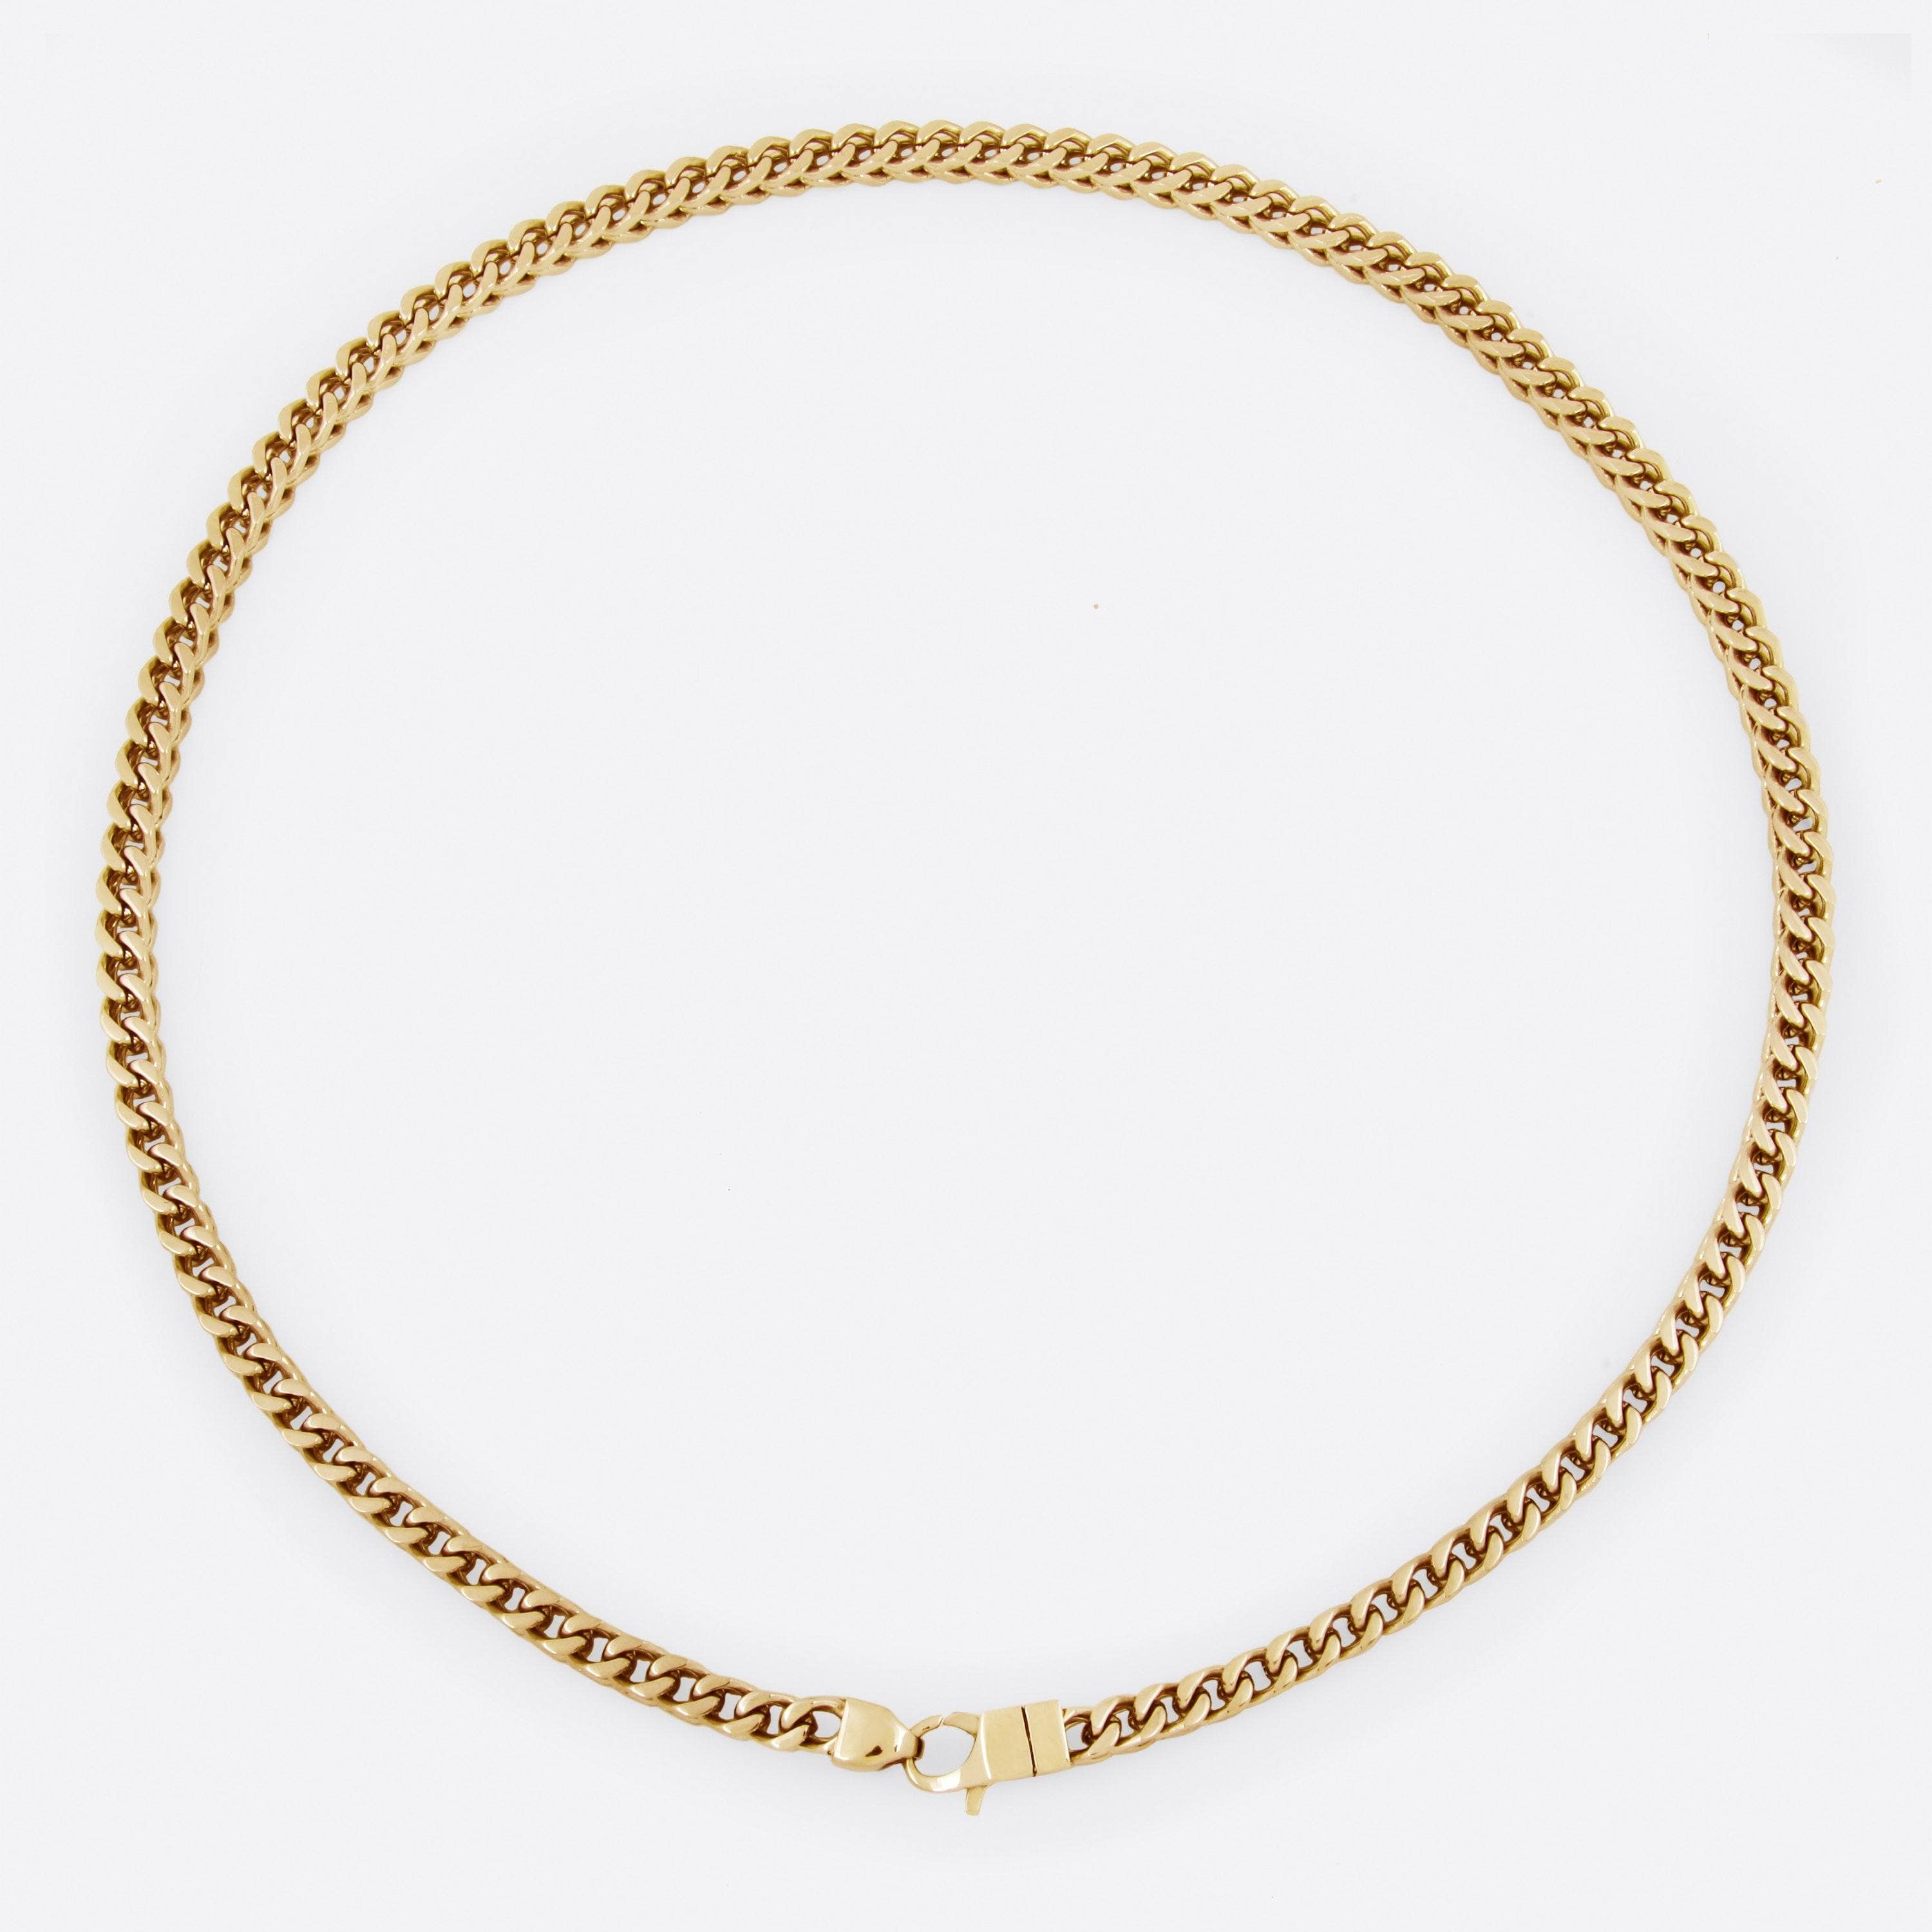 Franco Spinal Chain Necklace - GOLD